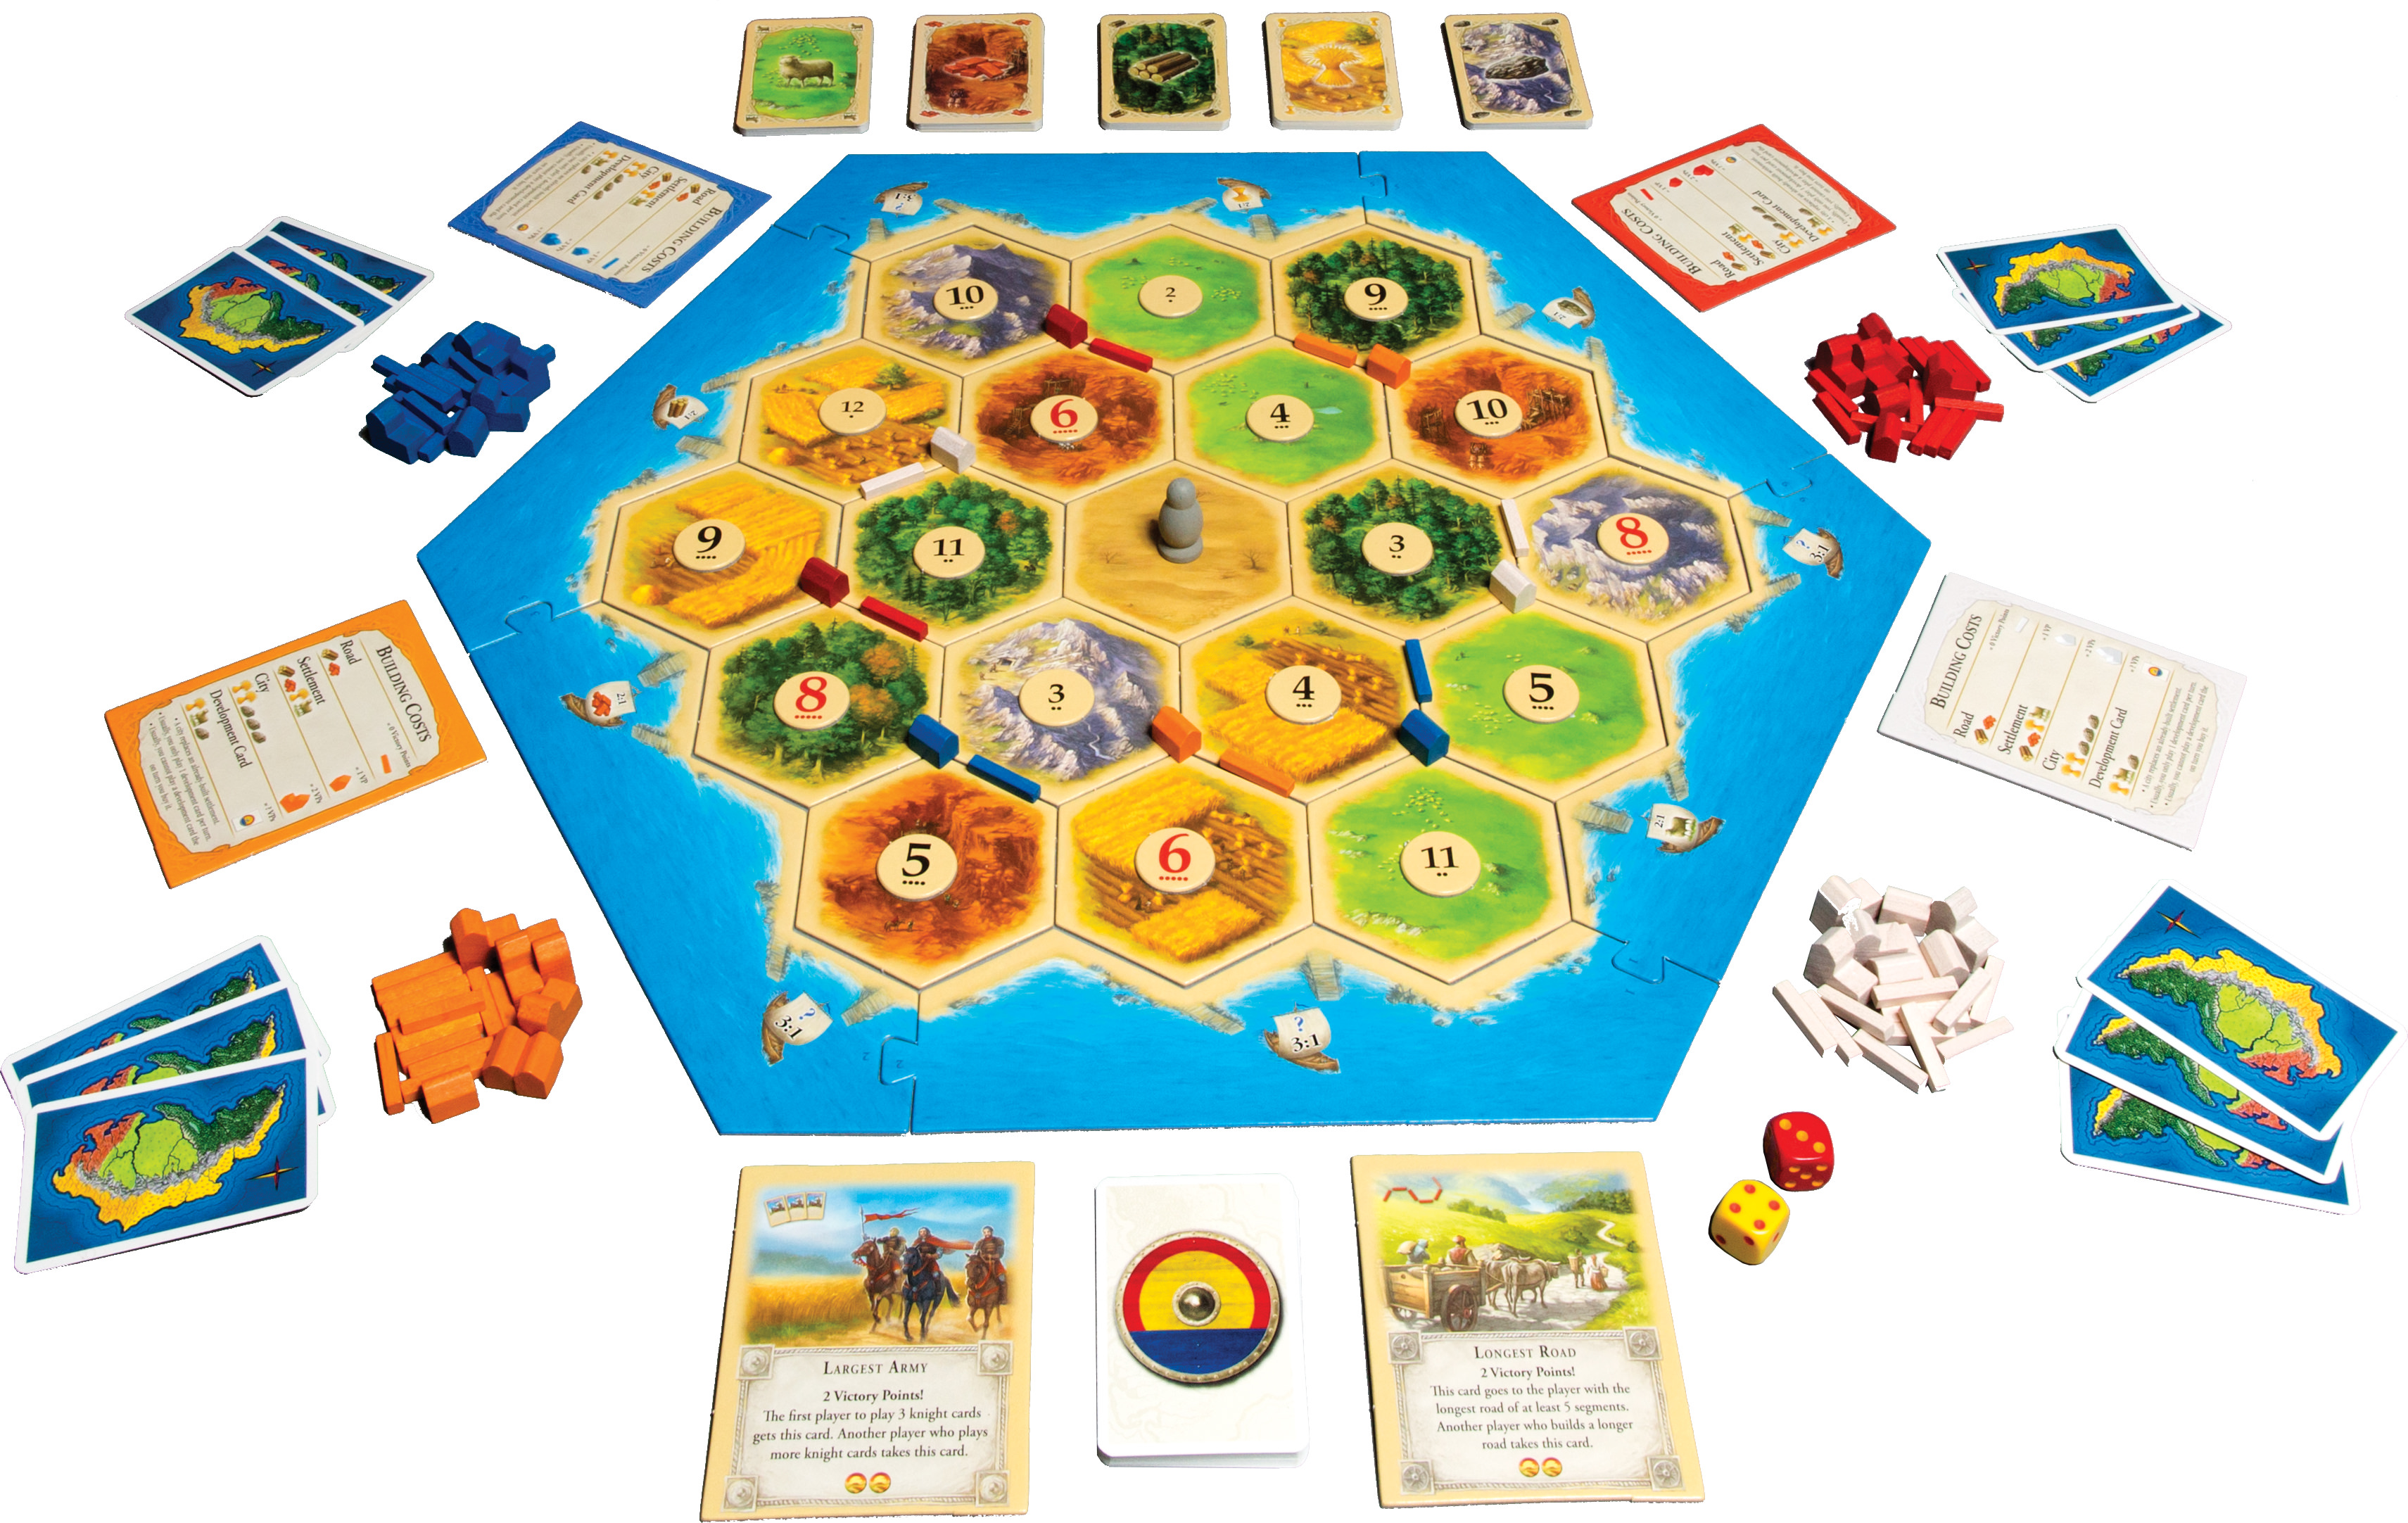 Catan Strategy Board Game: 5th Edition - image 4 of 7